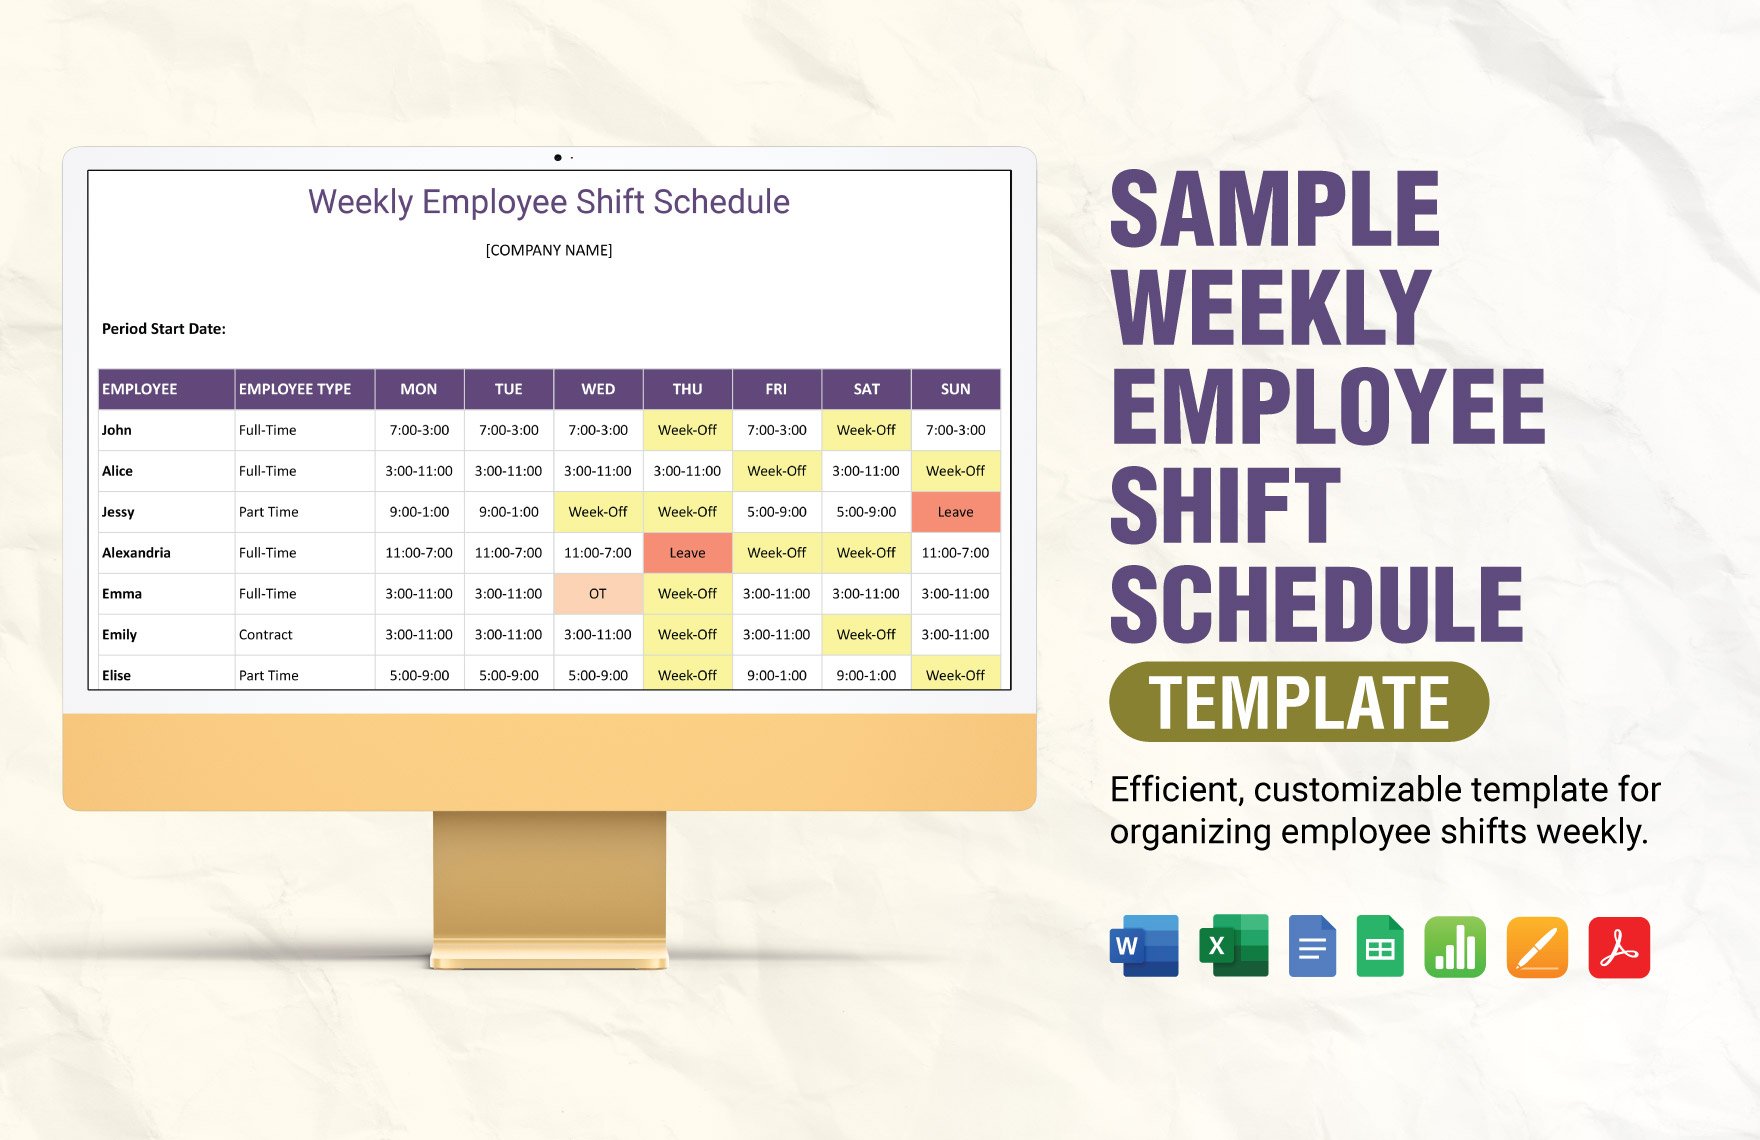 Sample Weekly Employee Shift Schedule Template in Word, Google Docs, Excel, PDF, Google Sheets, Apple Pages, Apple Numbers